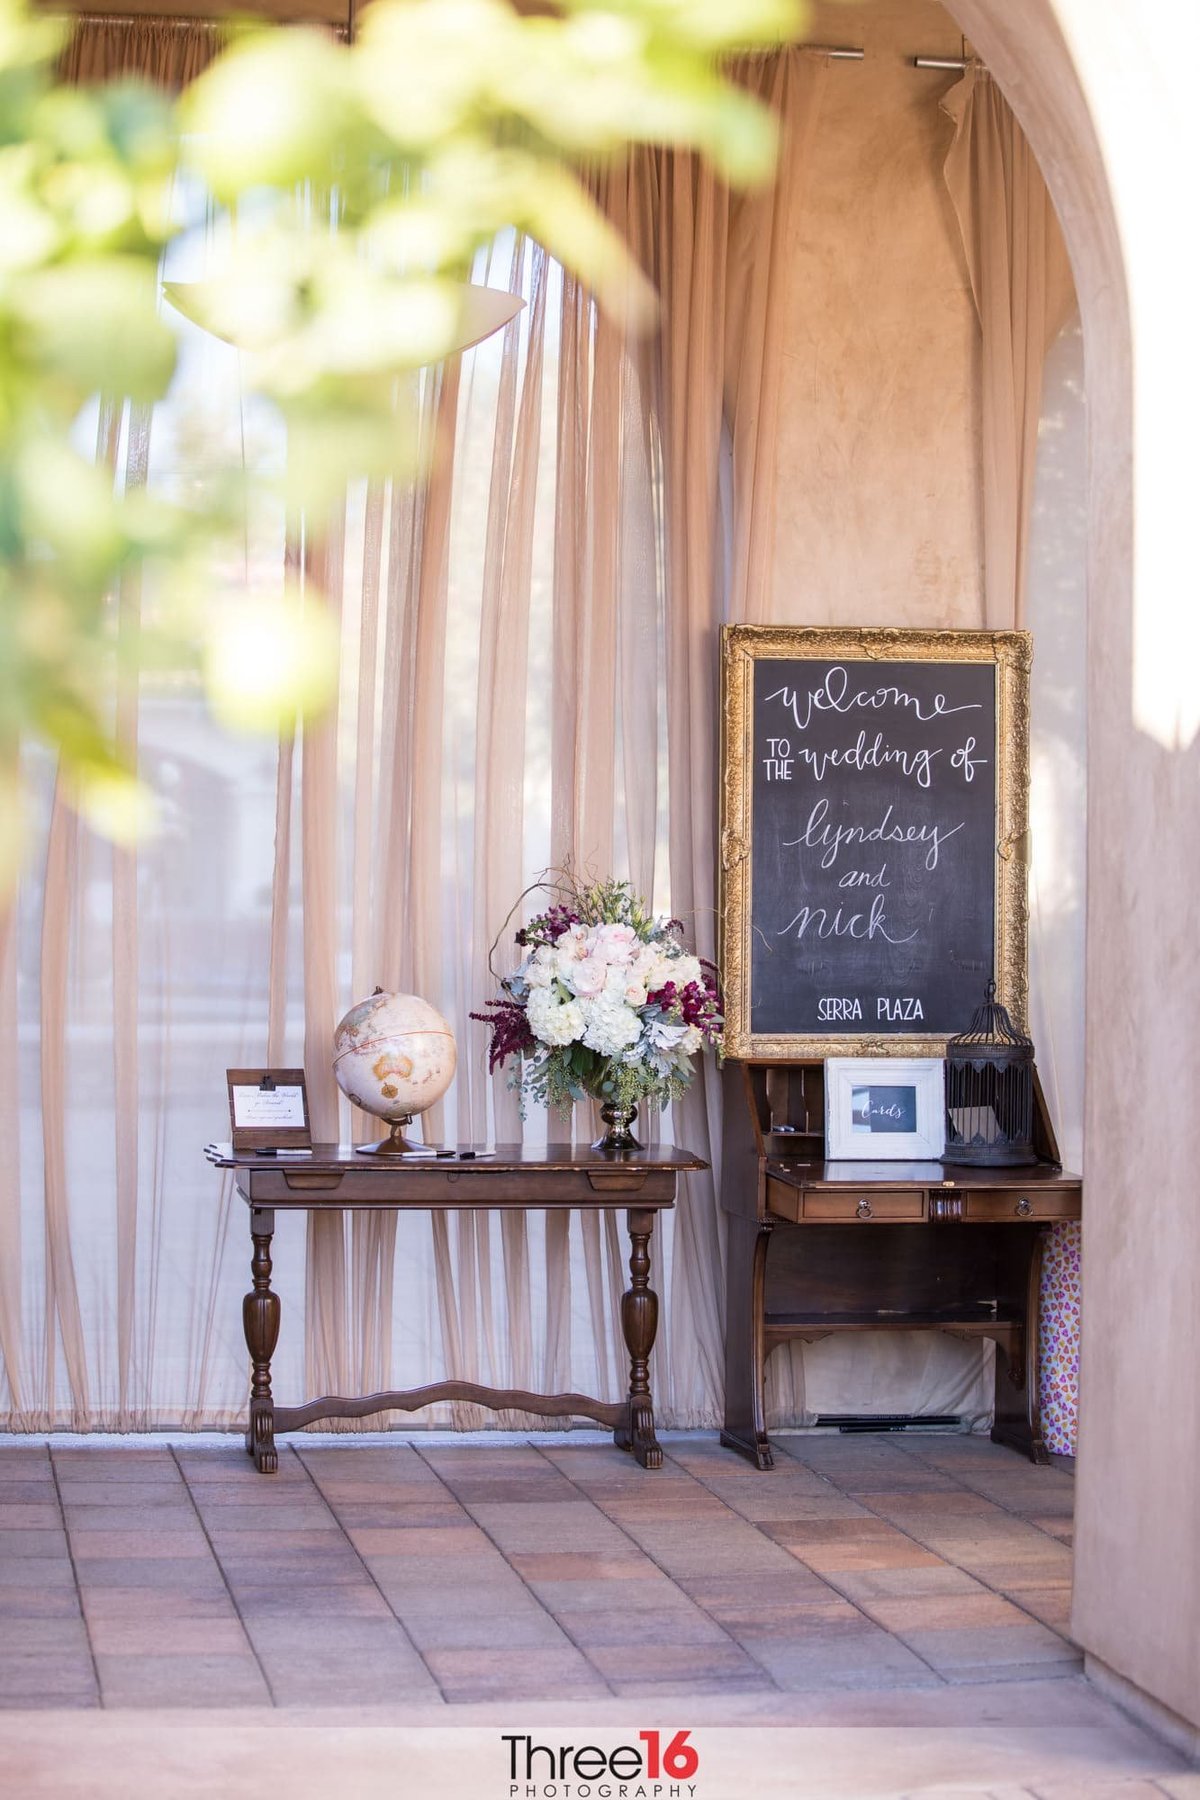 Welcoming Table at a Serra Plaza wedding ceremony